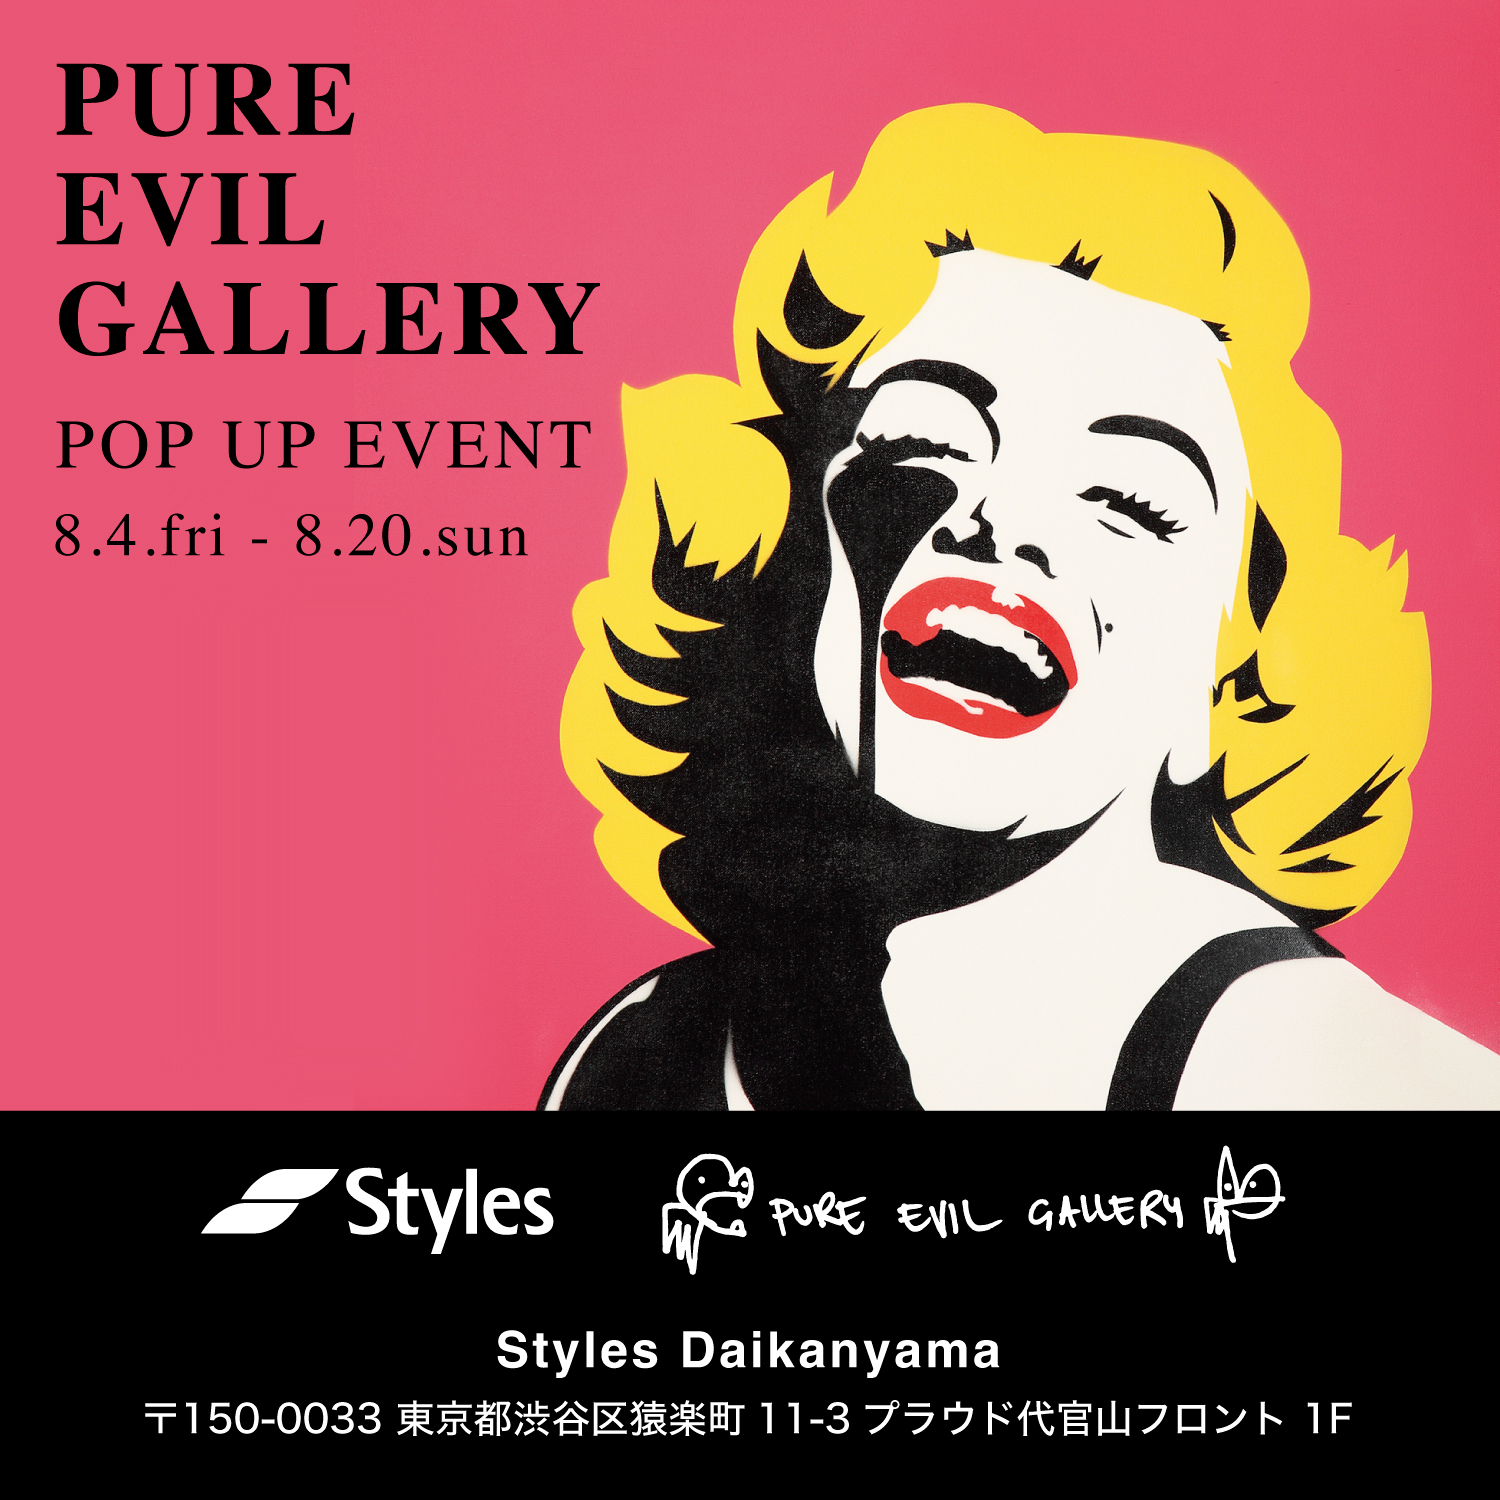 PURE EVIL GALLERY POP UP EVENT